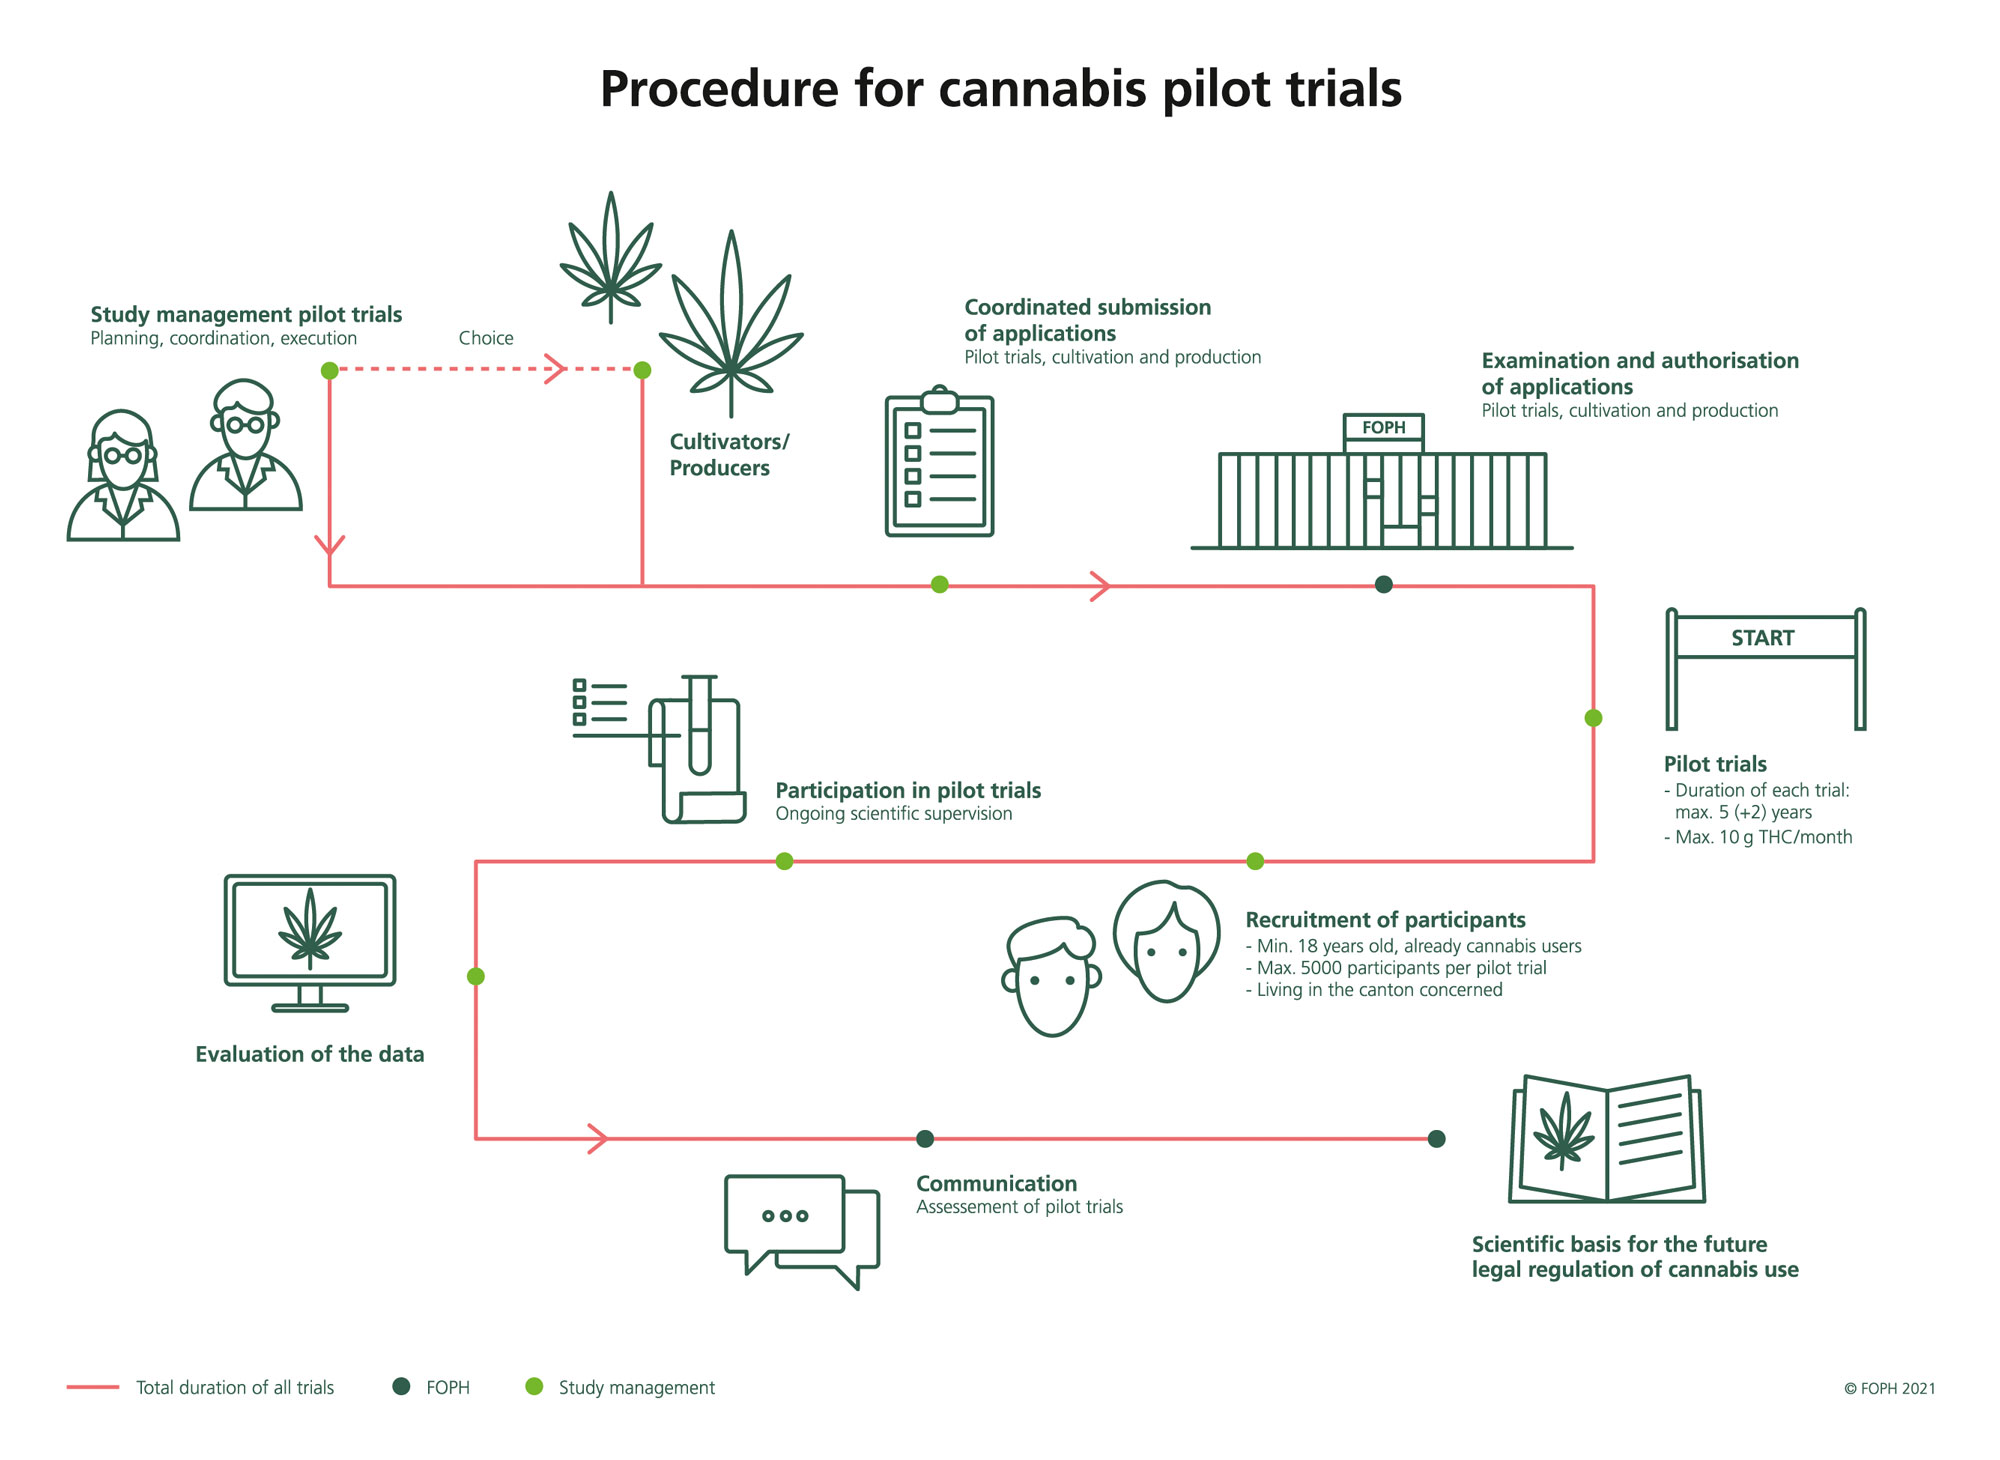 Procedure for cannabis pilot trials. Coordinated submission of applications, examination and authorization of applications, Start Pilot trials, recruitment of participants, evaluation of the data and communication. The pilot trials are the scientific basis for the future legal regulation of cannabis use.